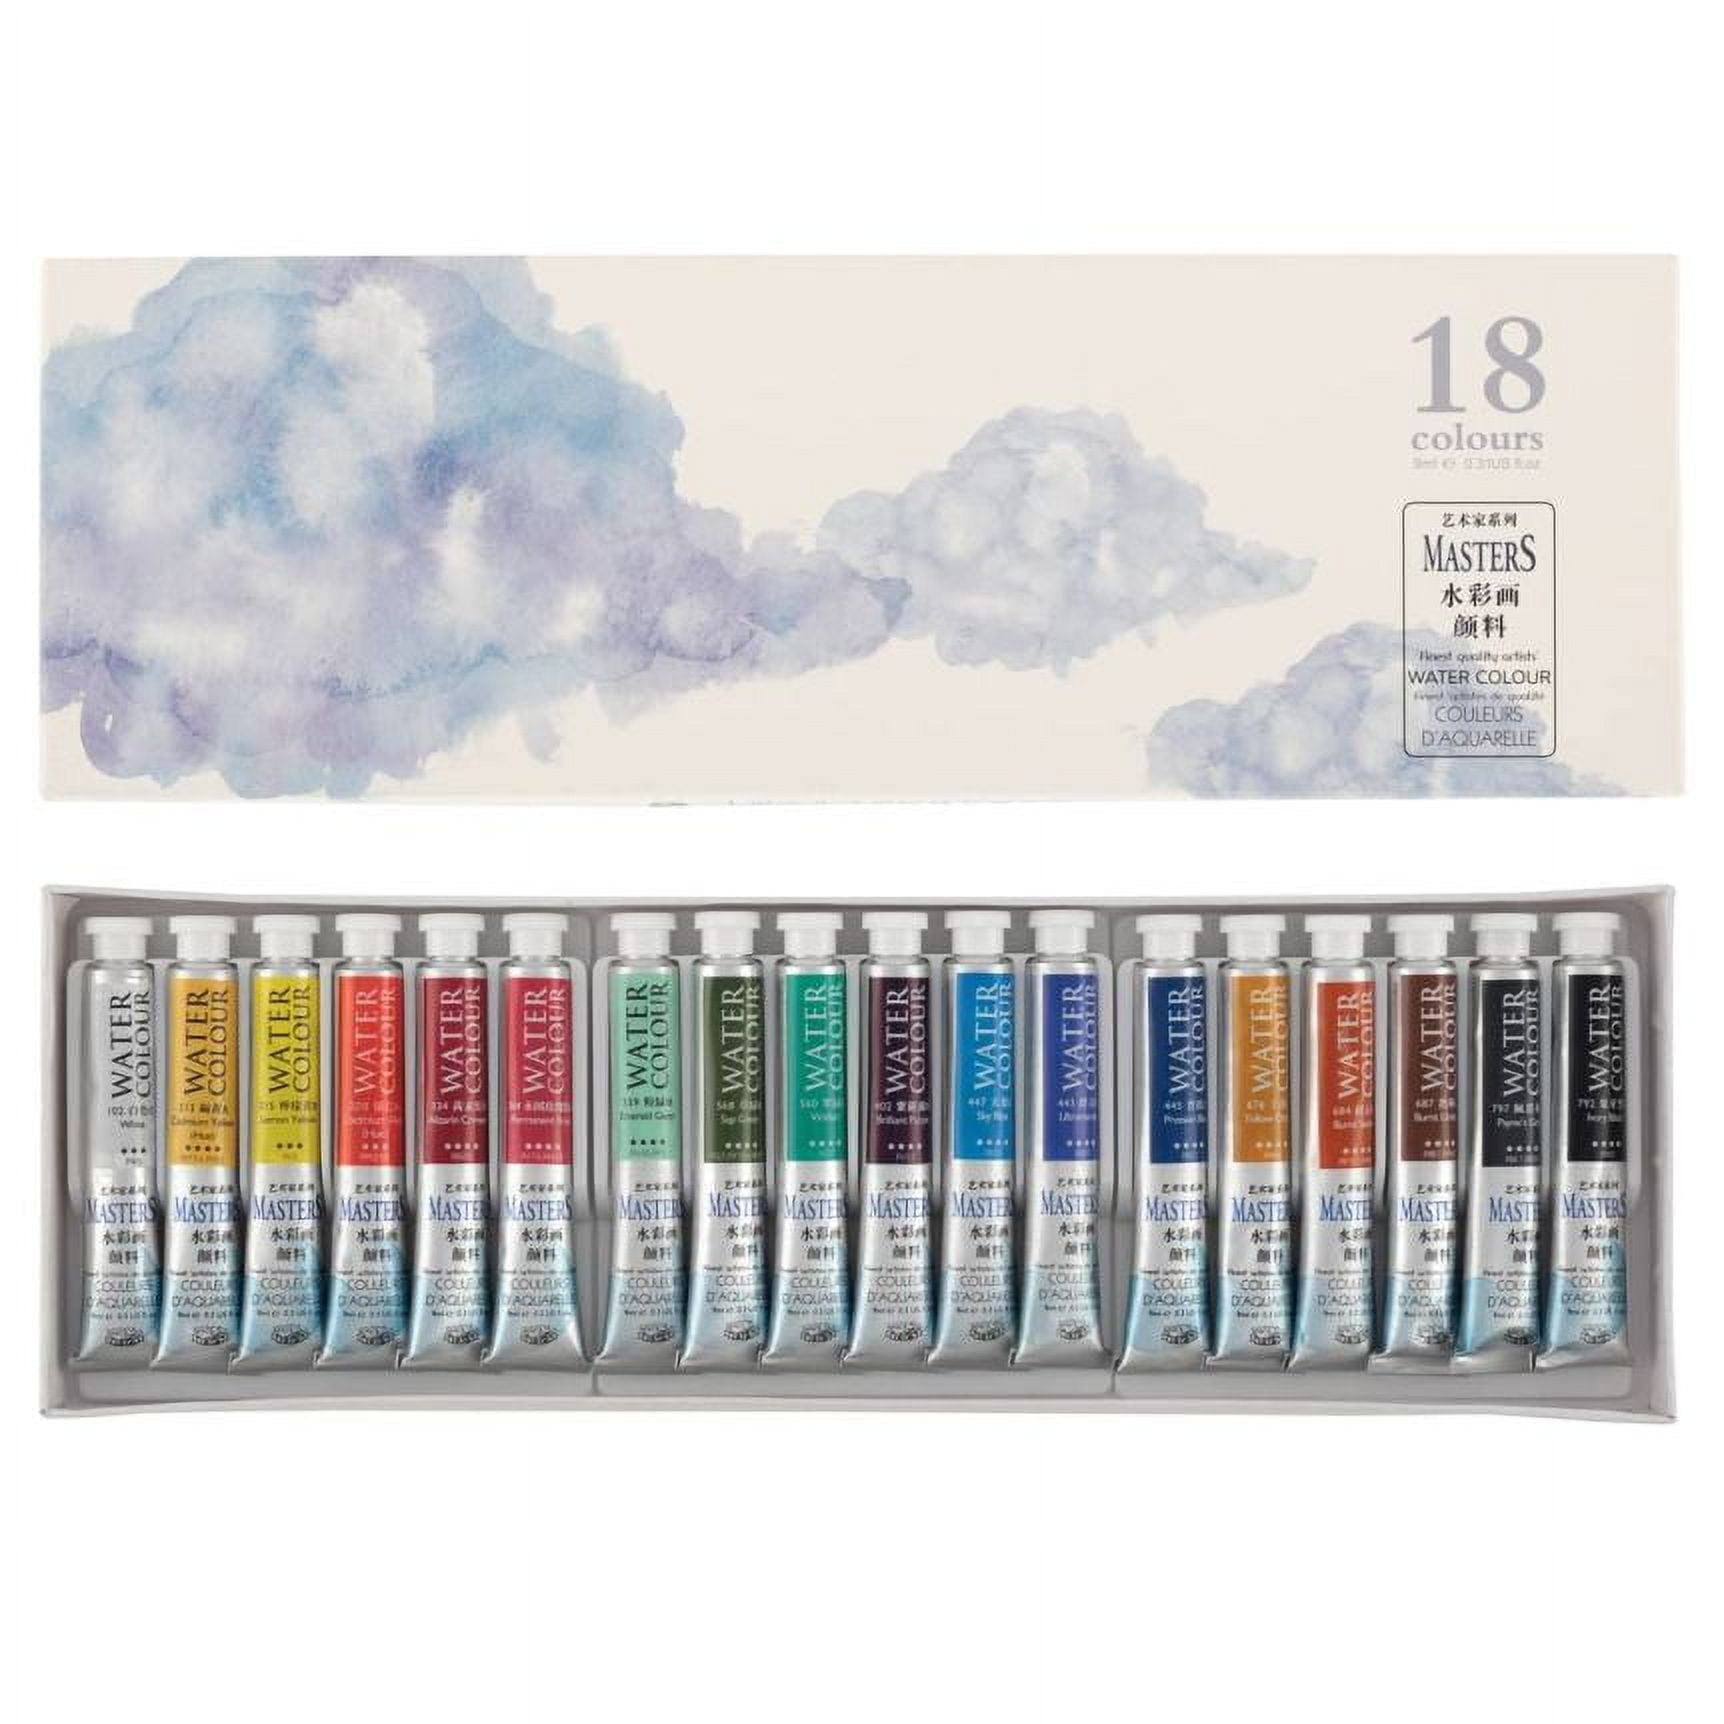 Marie's Watercolor Paint Set - Concentrated Color, Pure Pigments, High  Lightfastness Ratings Craft Paint for Artists - Set of 18 Assorted Colors  (9 mL/0.3 oz) 